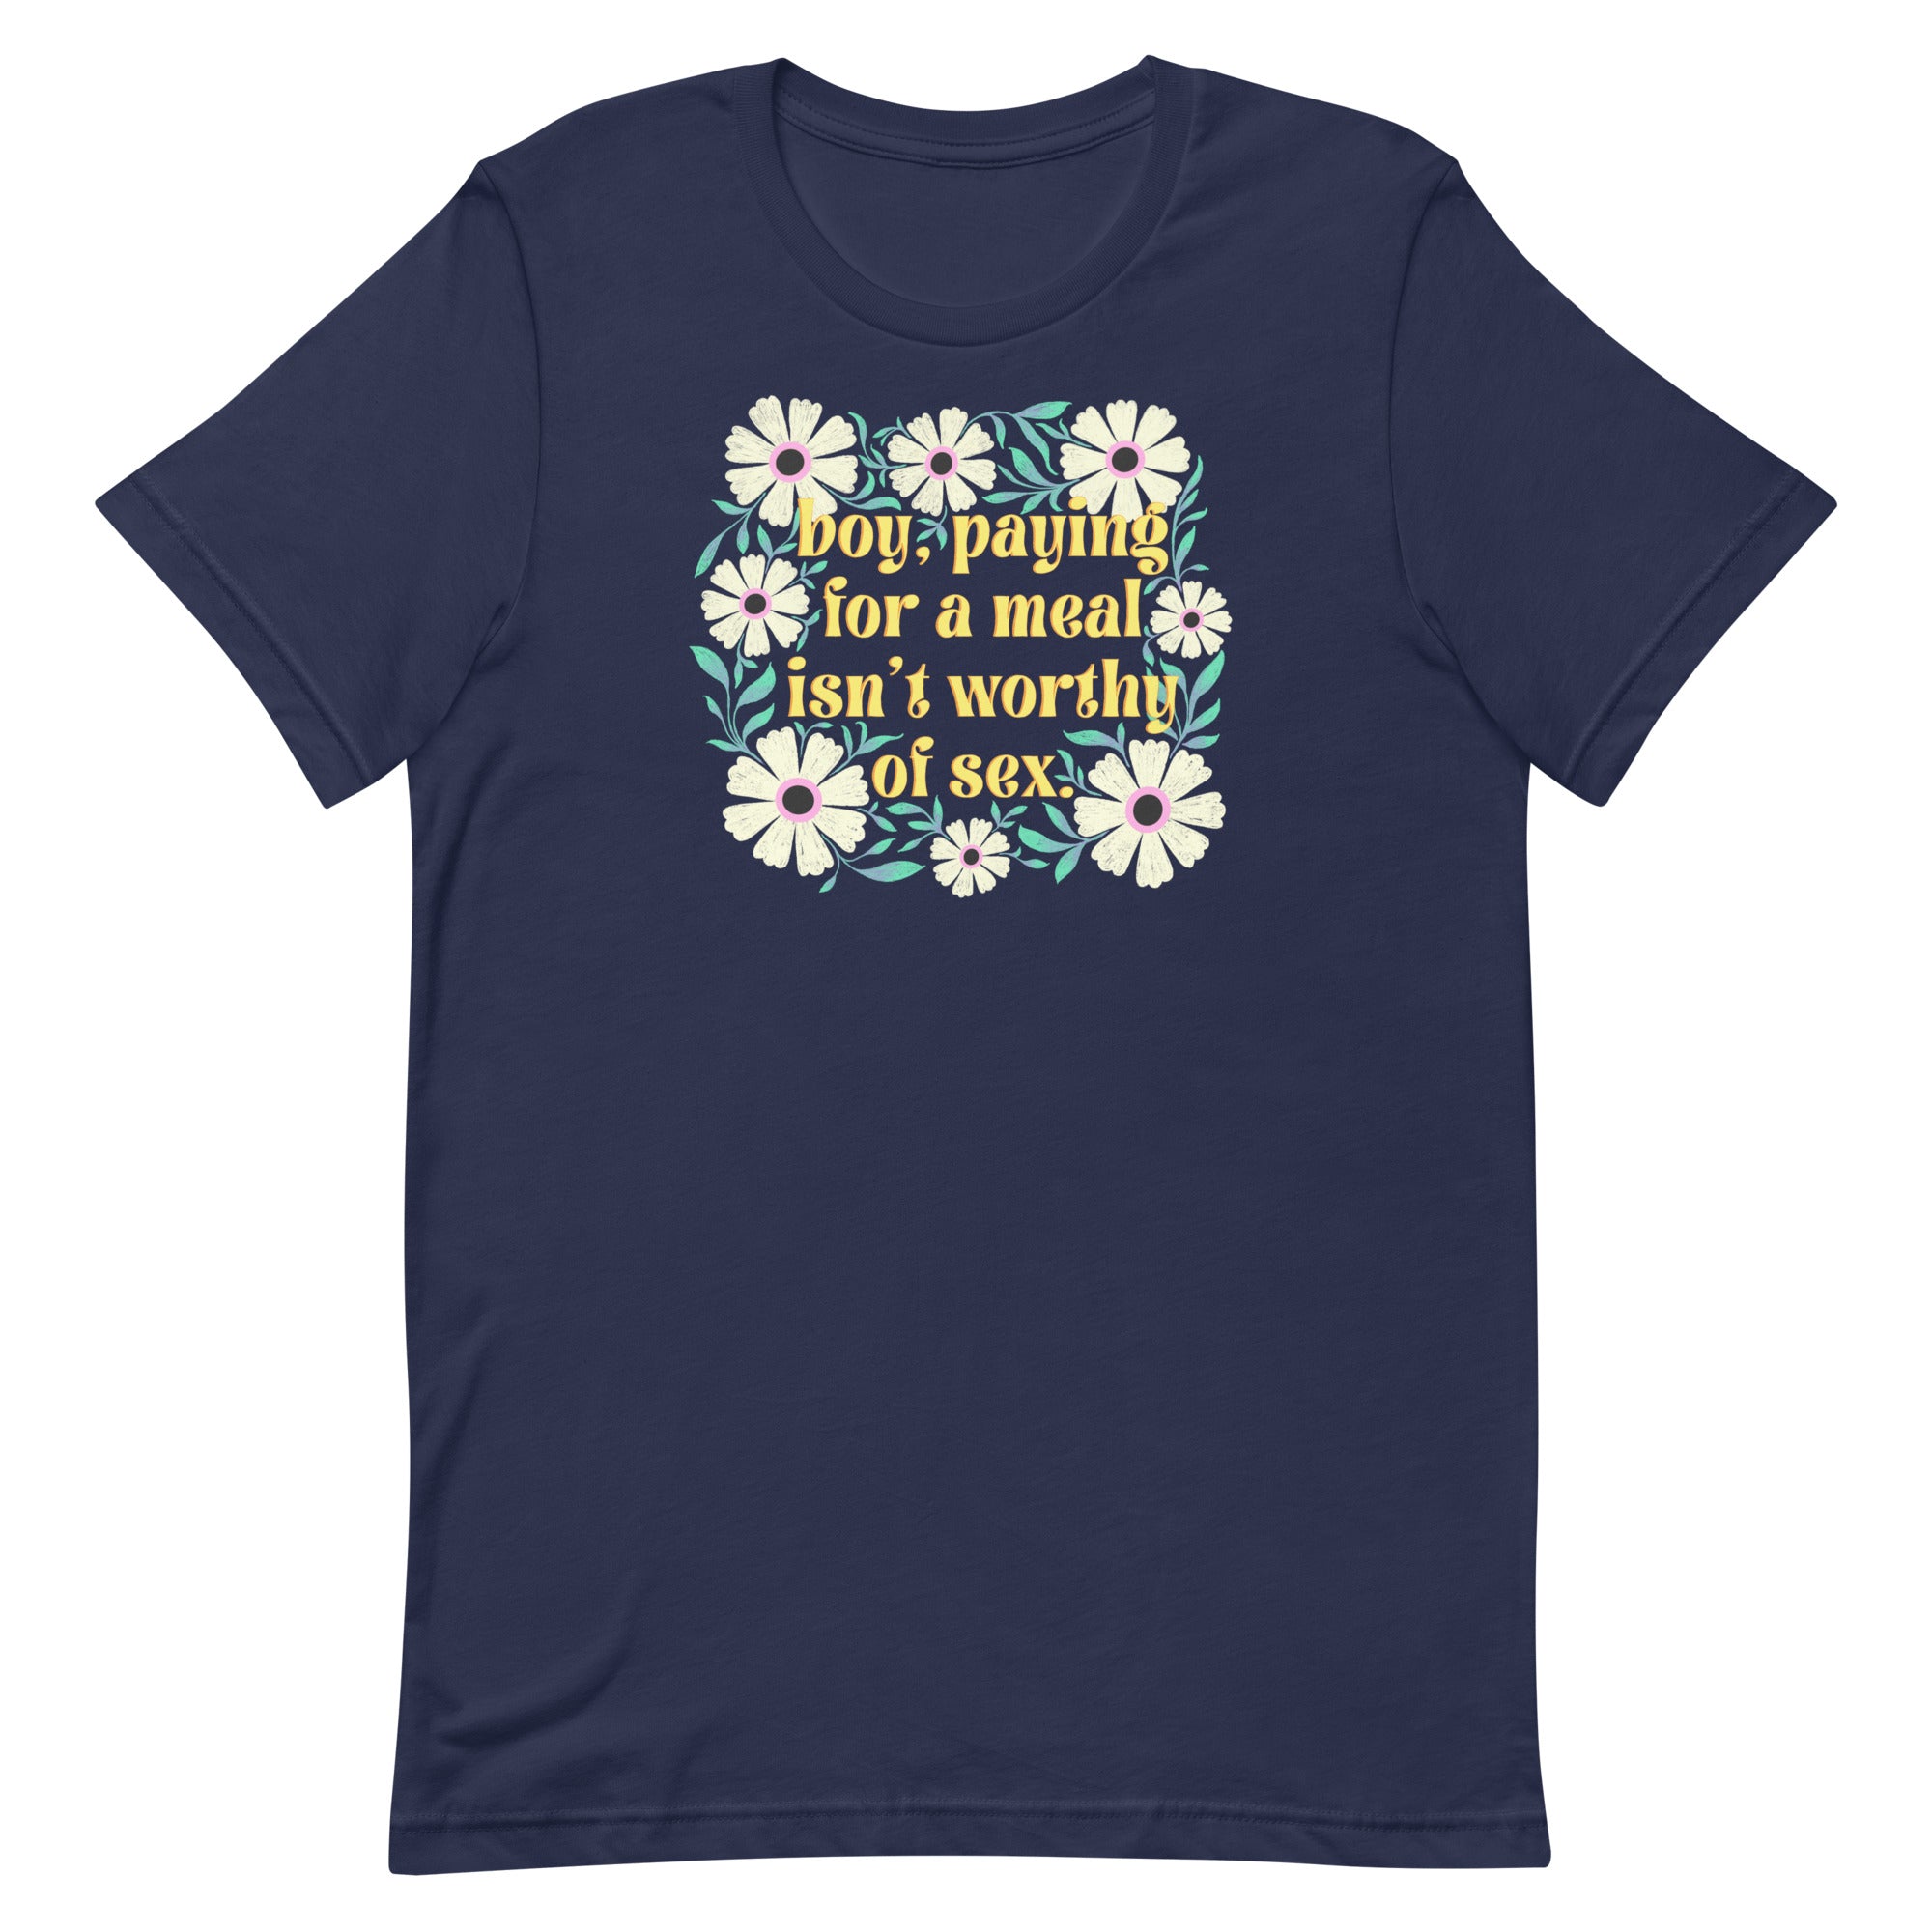 Paying For A Meal Isn’t Worthy Of Sex Unisex Feminist T-shirt - Shop Women’s Rights T-shirts - Feminist Trash Store - Navy